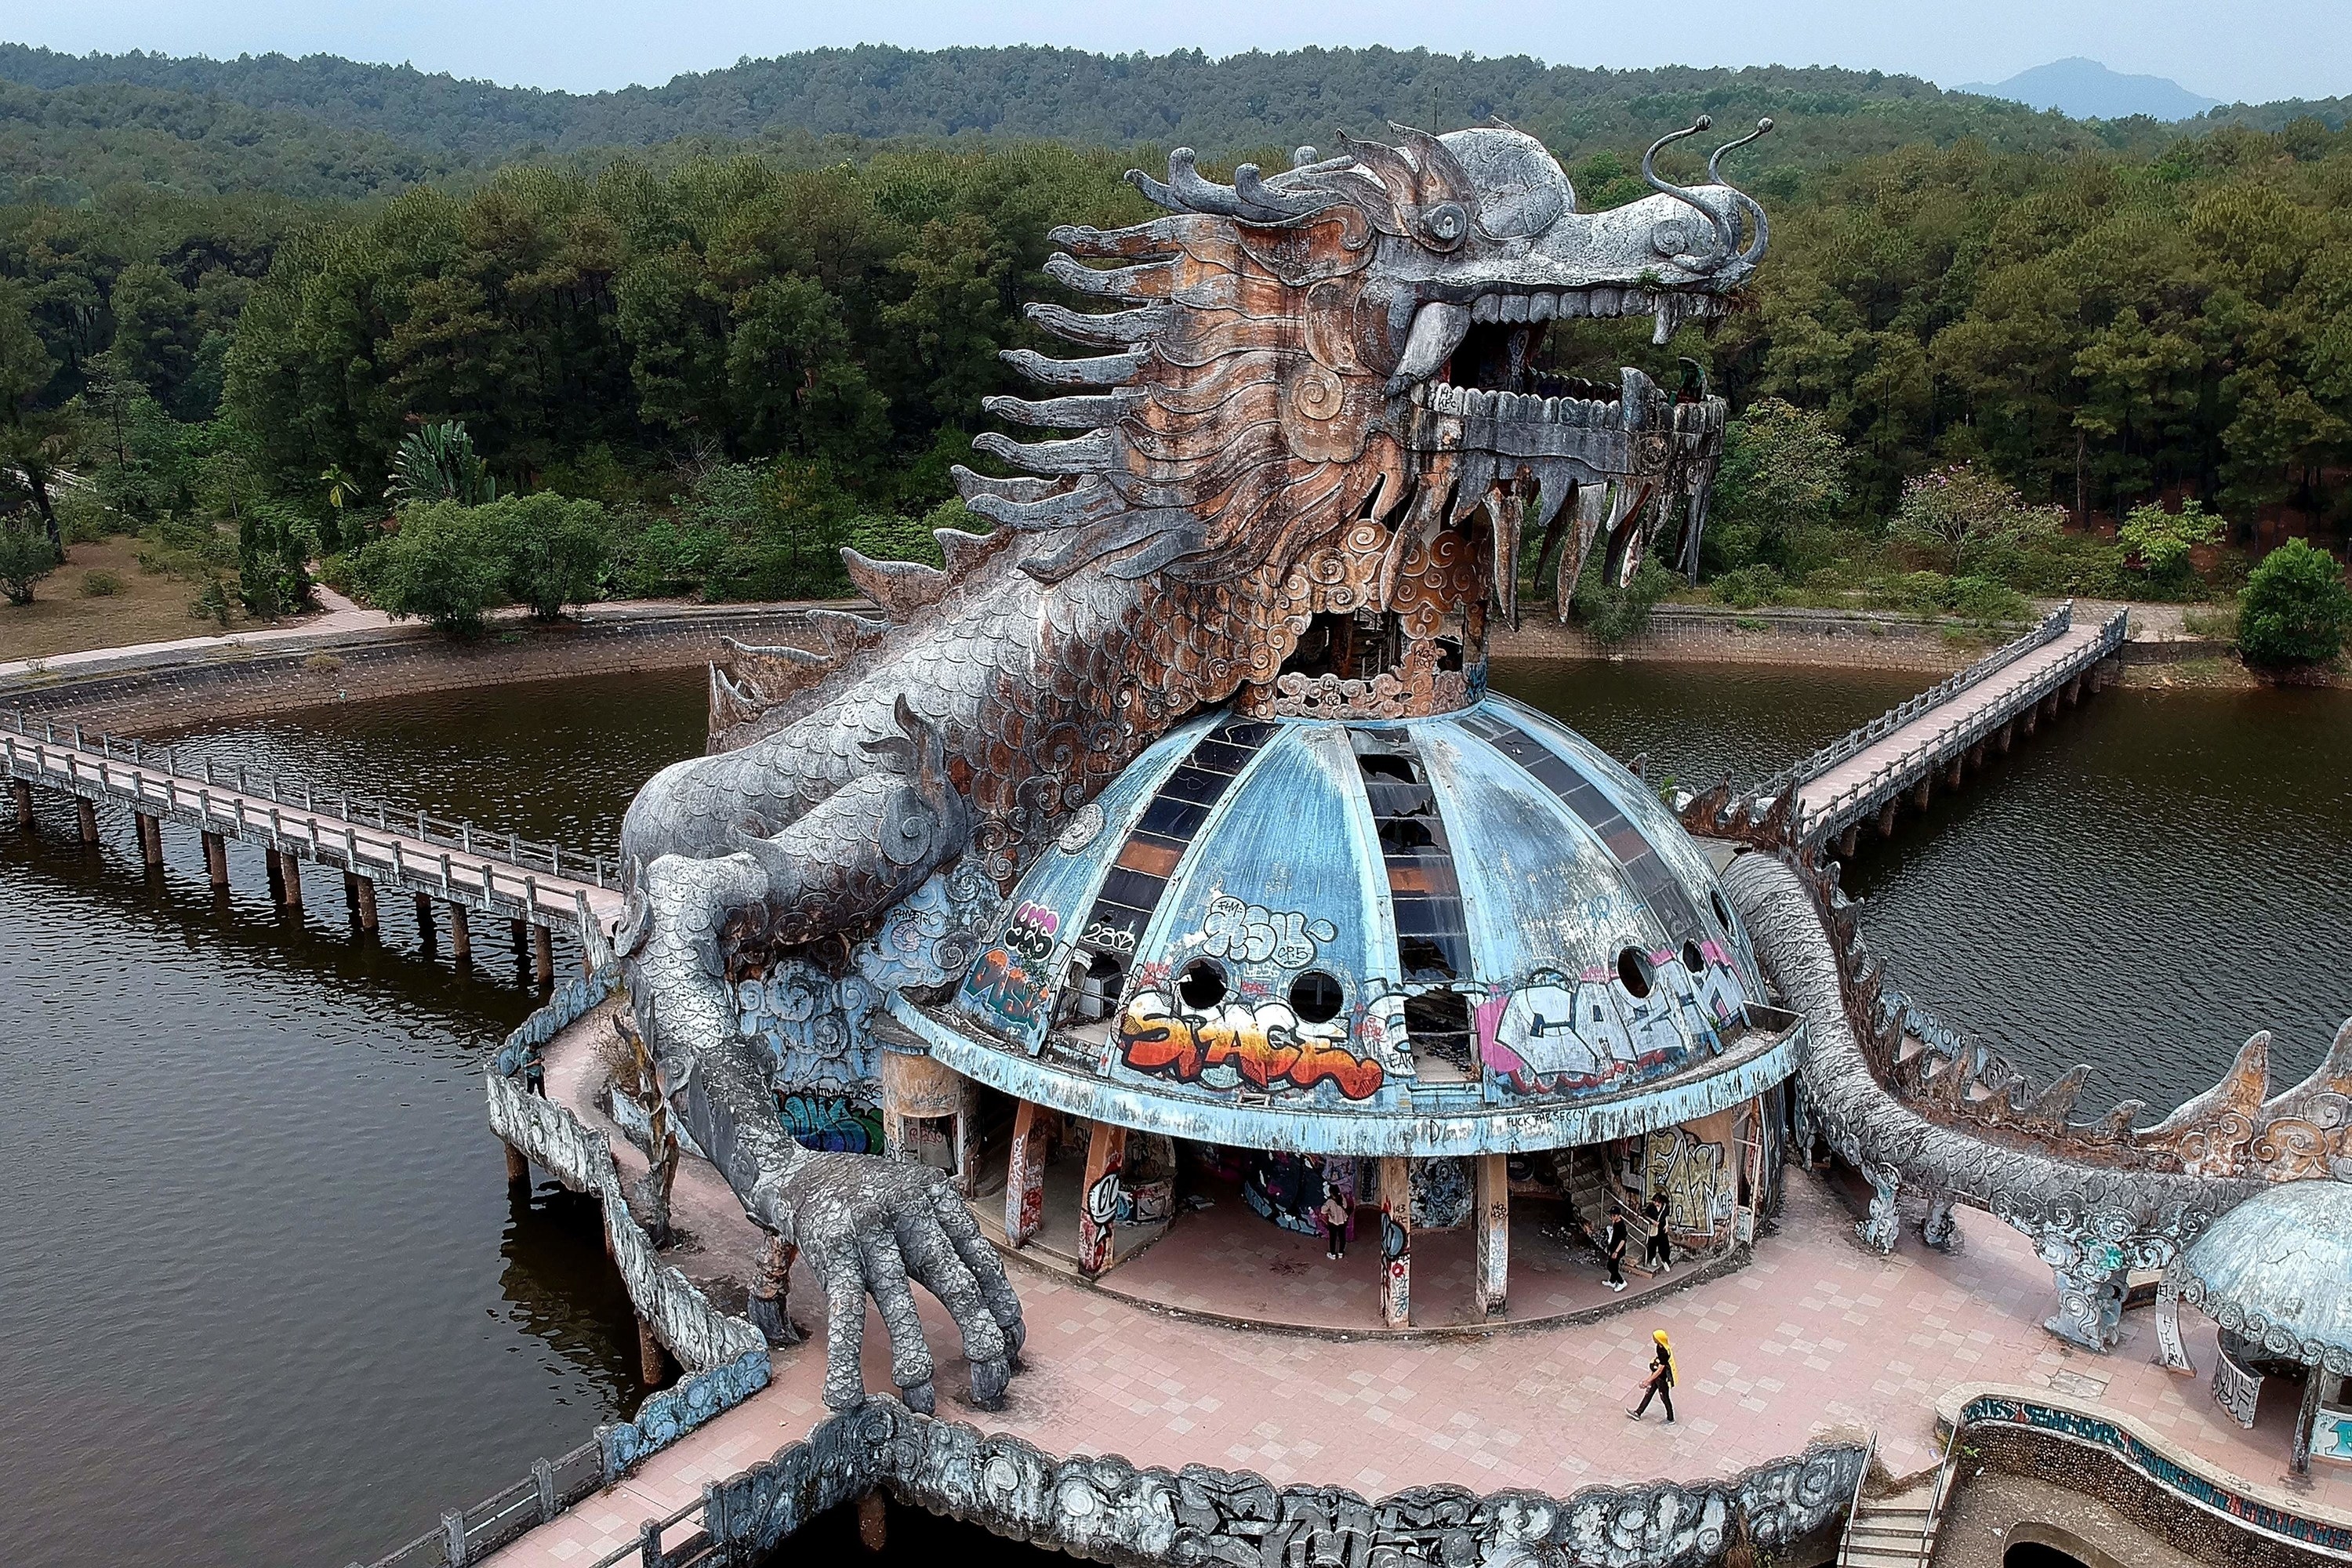 Abandoned waterpark with graffiti and desolate dragon staircase